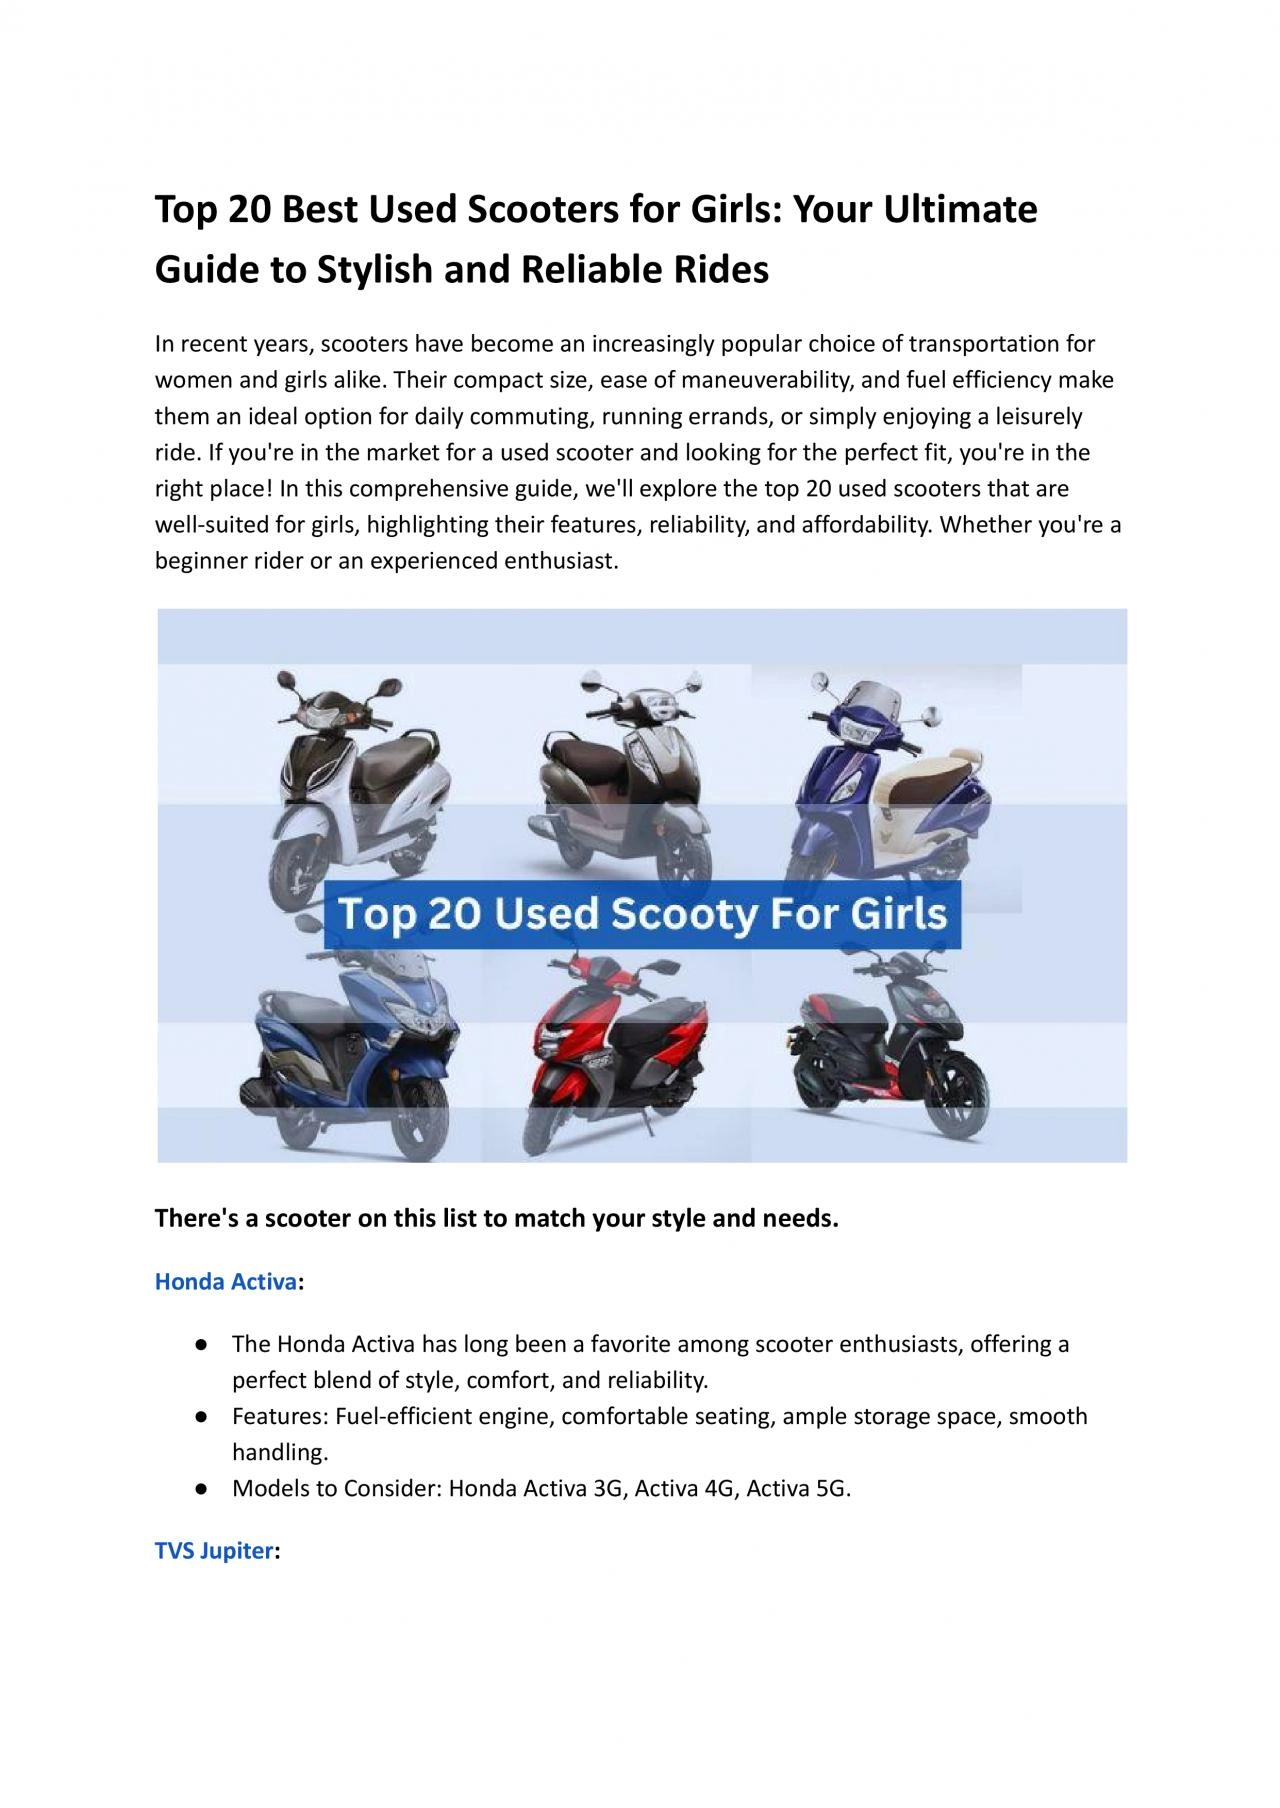 Top 20 Best Used Scooters for Girls